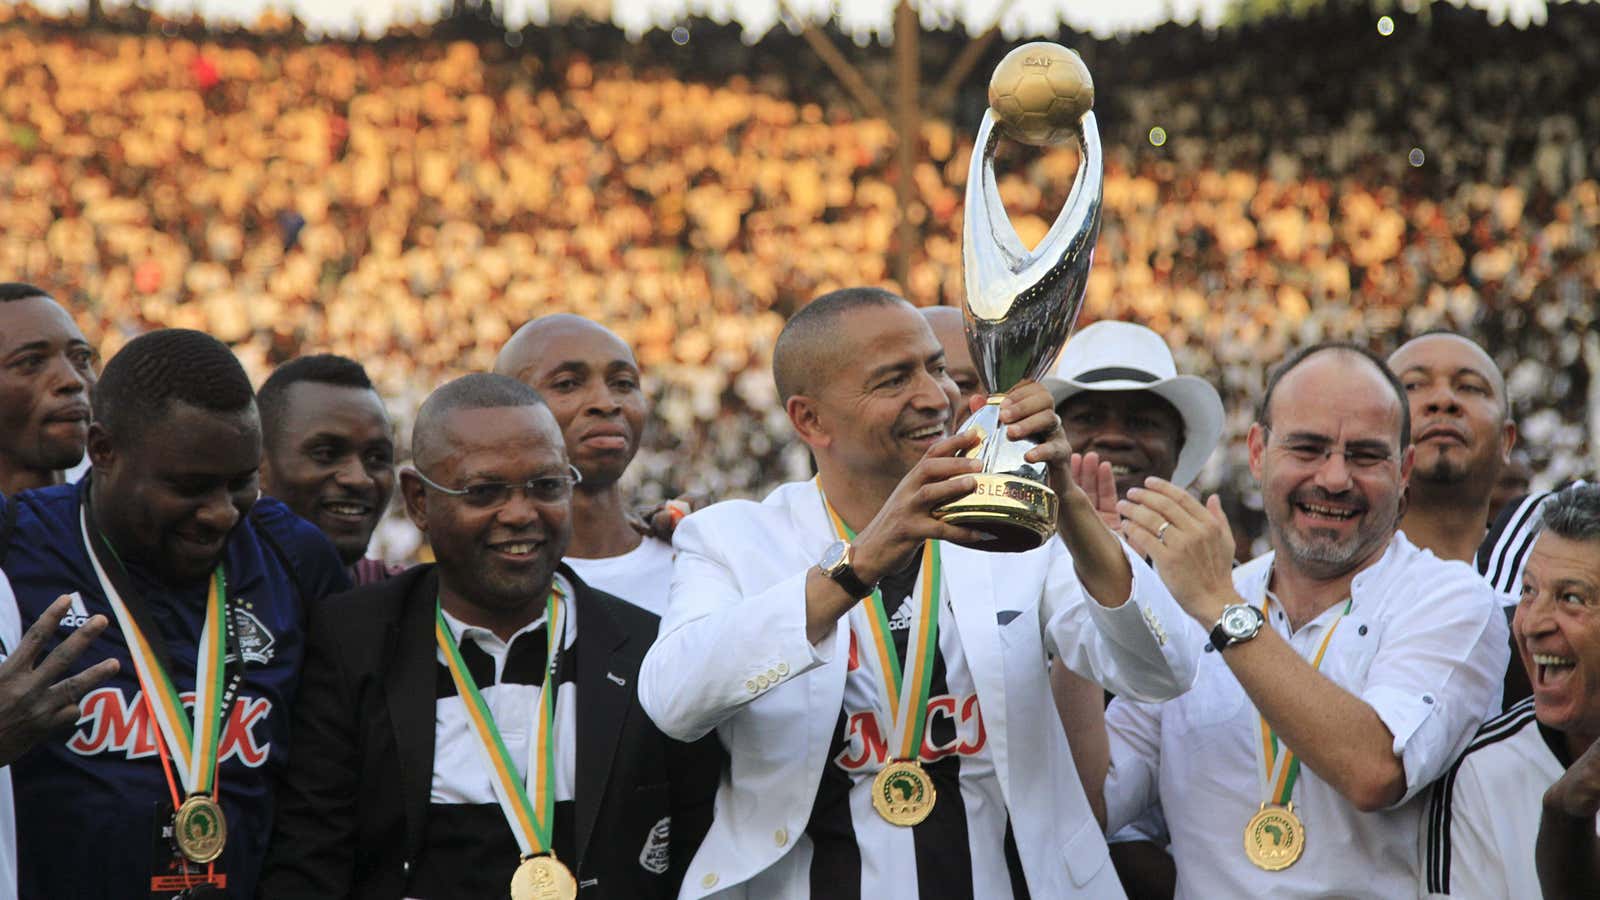 Congolese politician and businessman Moise Katumbi with members of his soccer team TP Mazembe after winning their fifth African Champions League title.